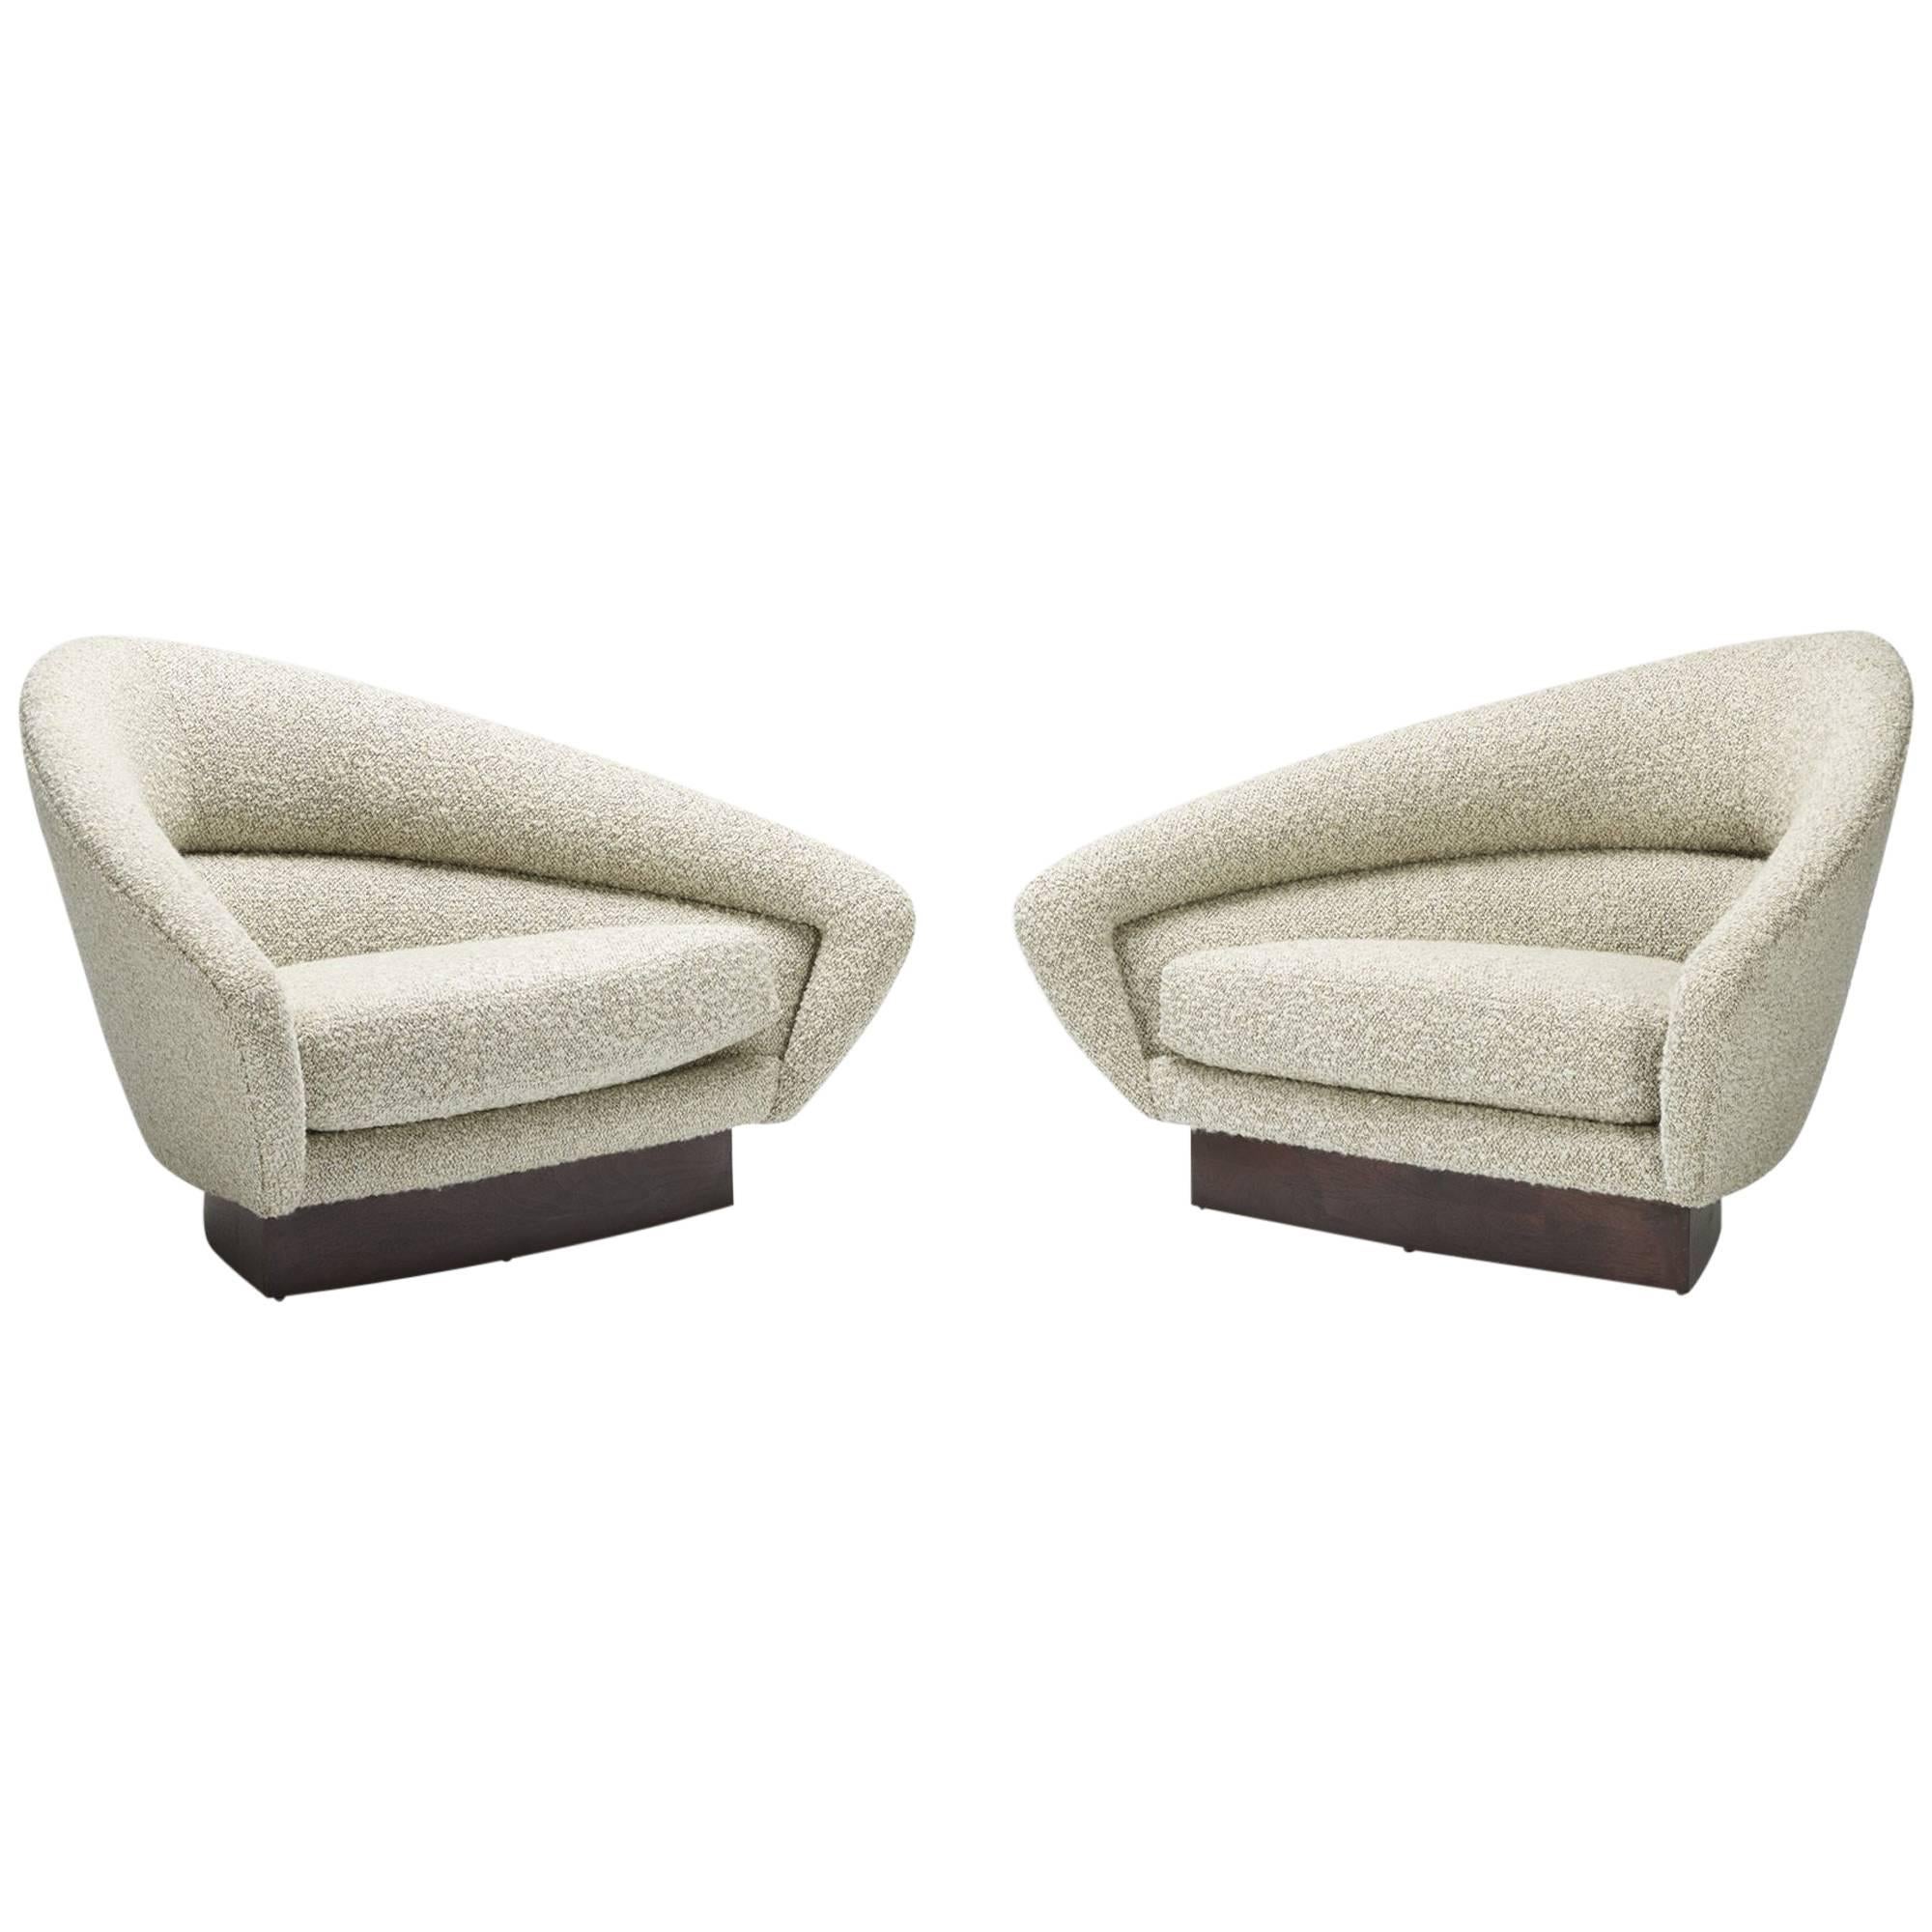 Pair of Lounge Chairs by Adrian Pearsall for Craft Associates